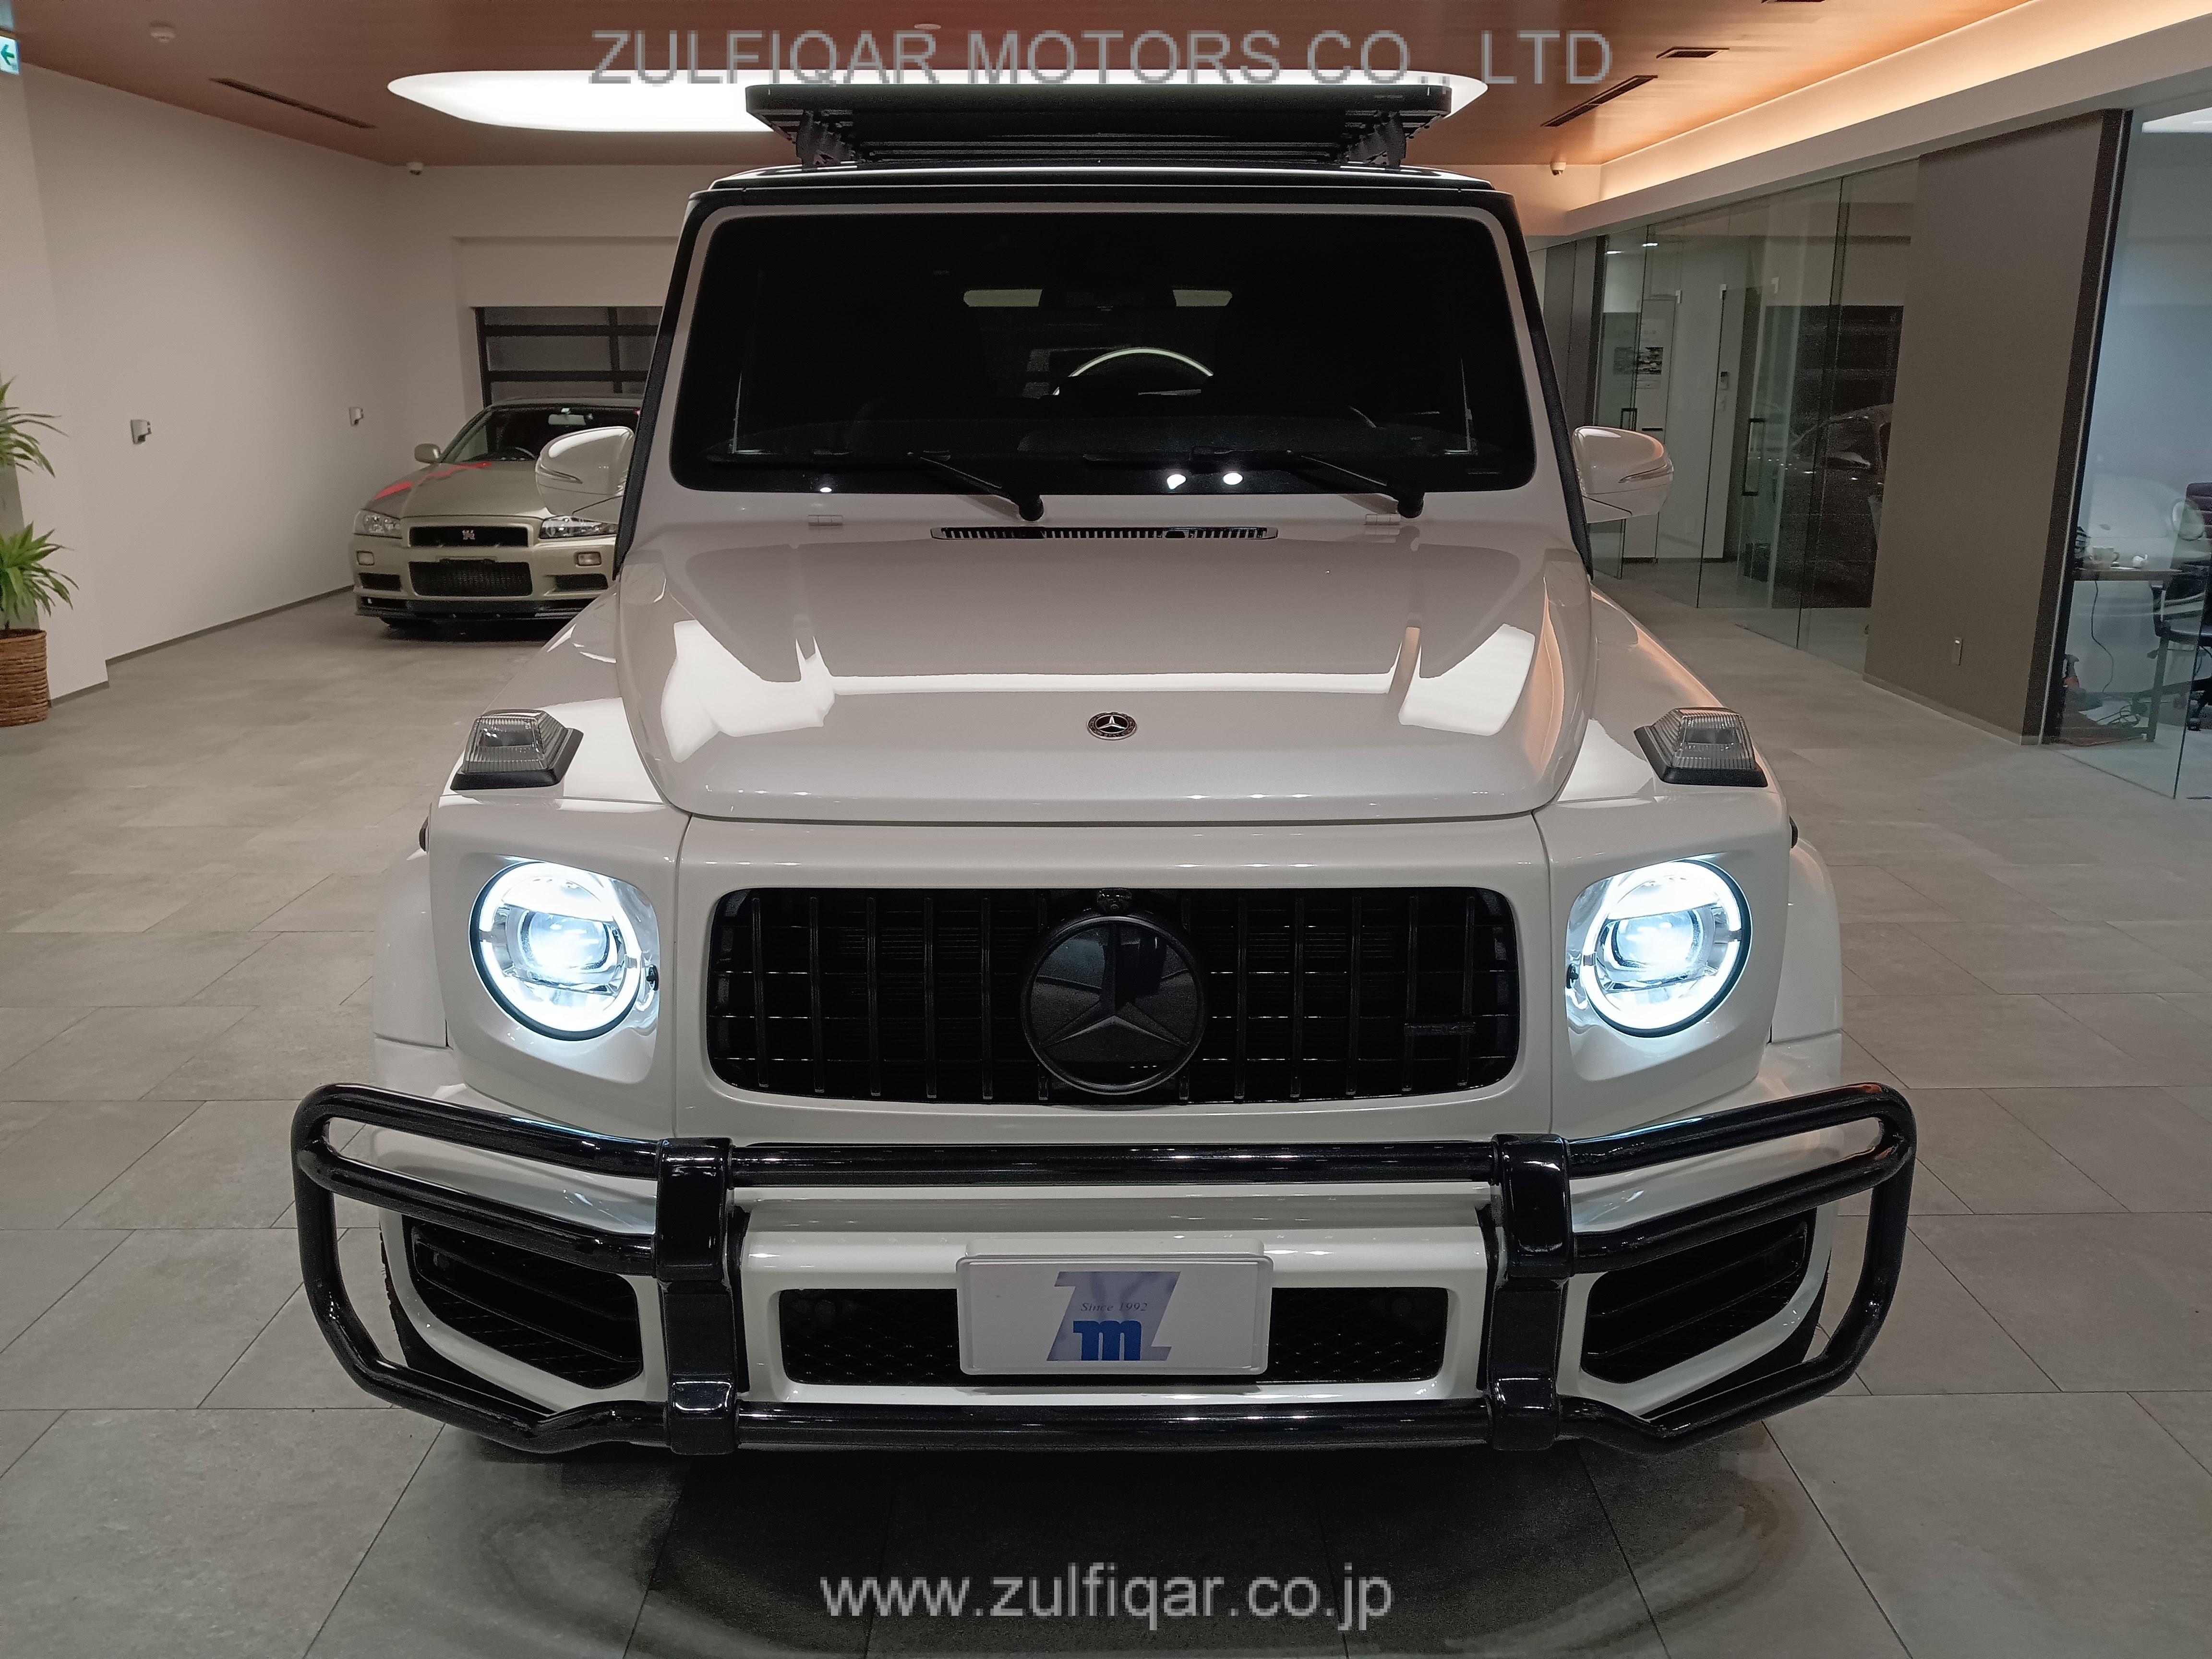 MERCEDES AMG G CLASS 2021 Image 2